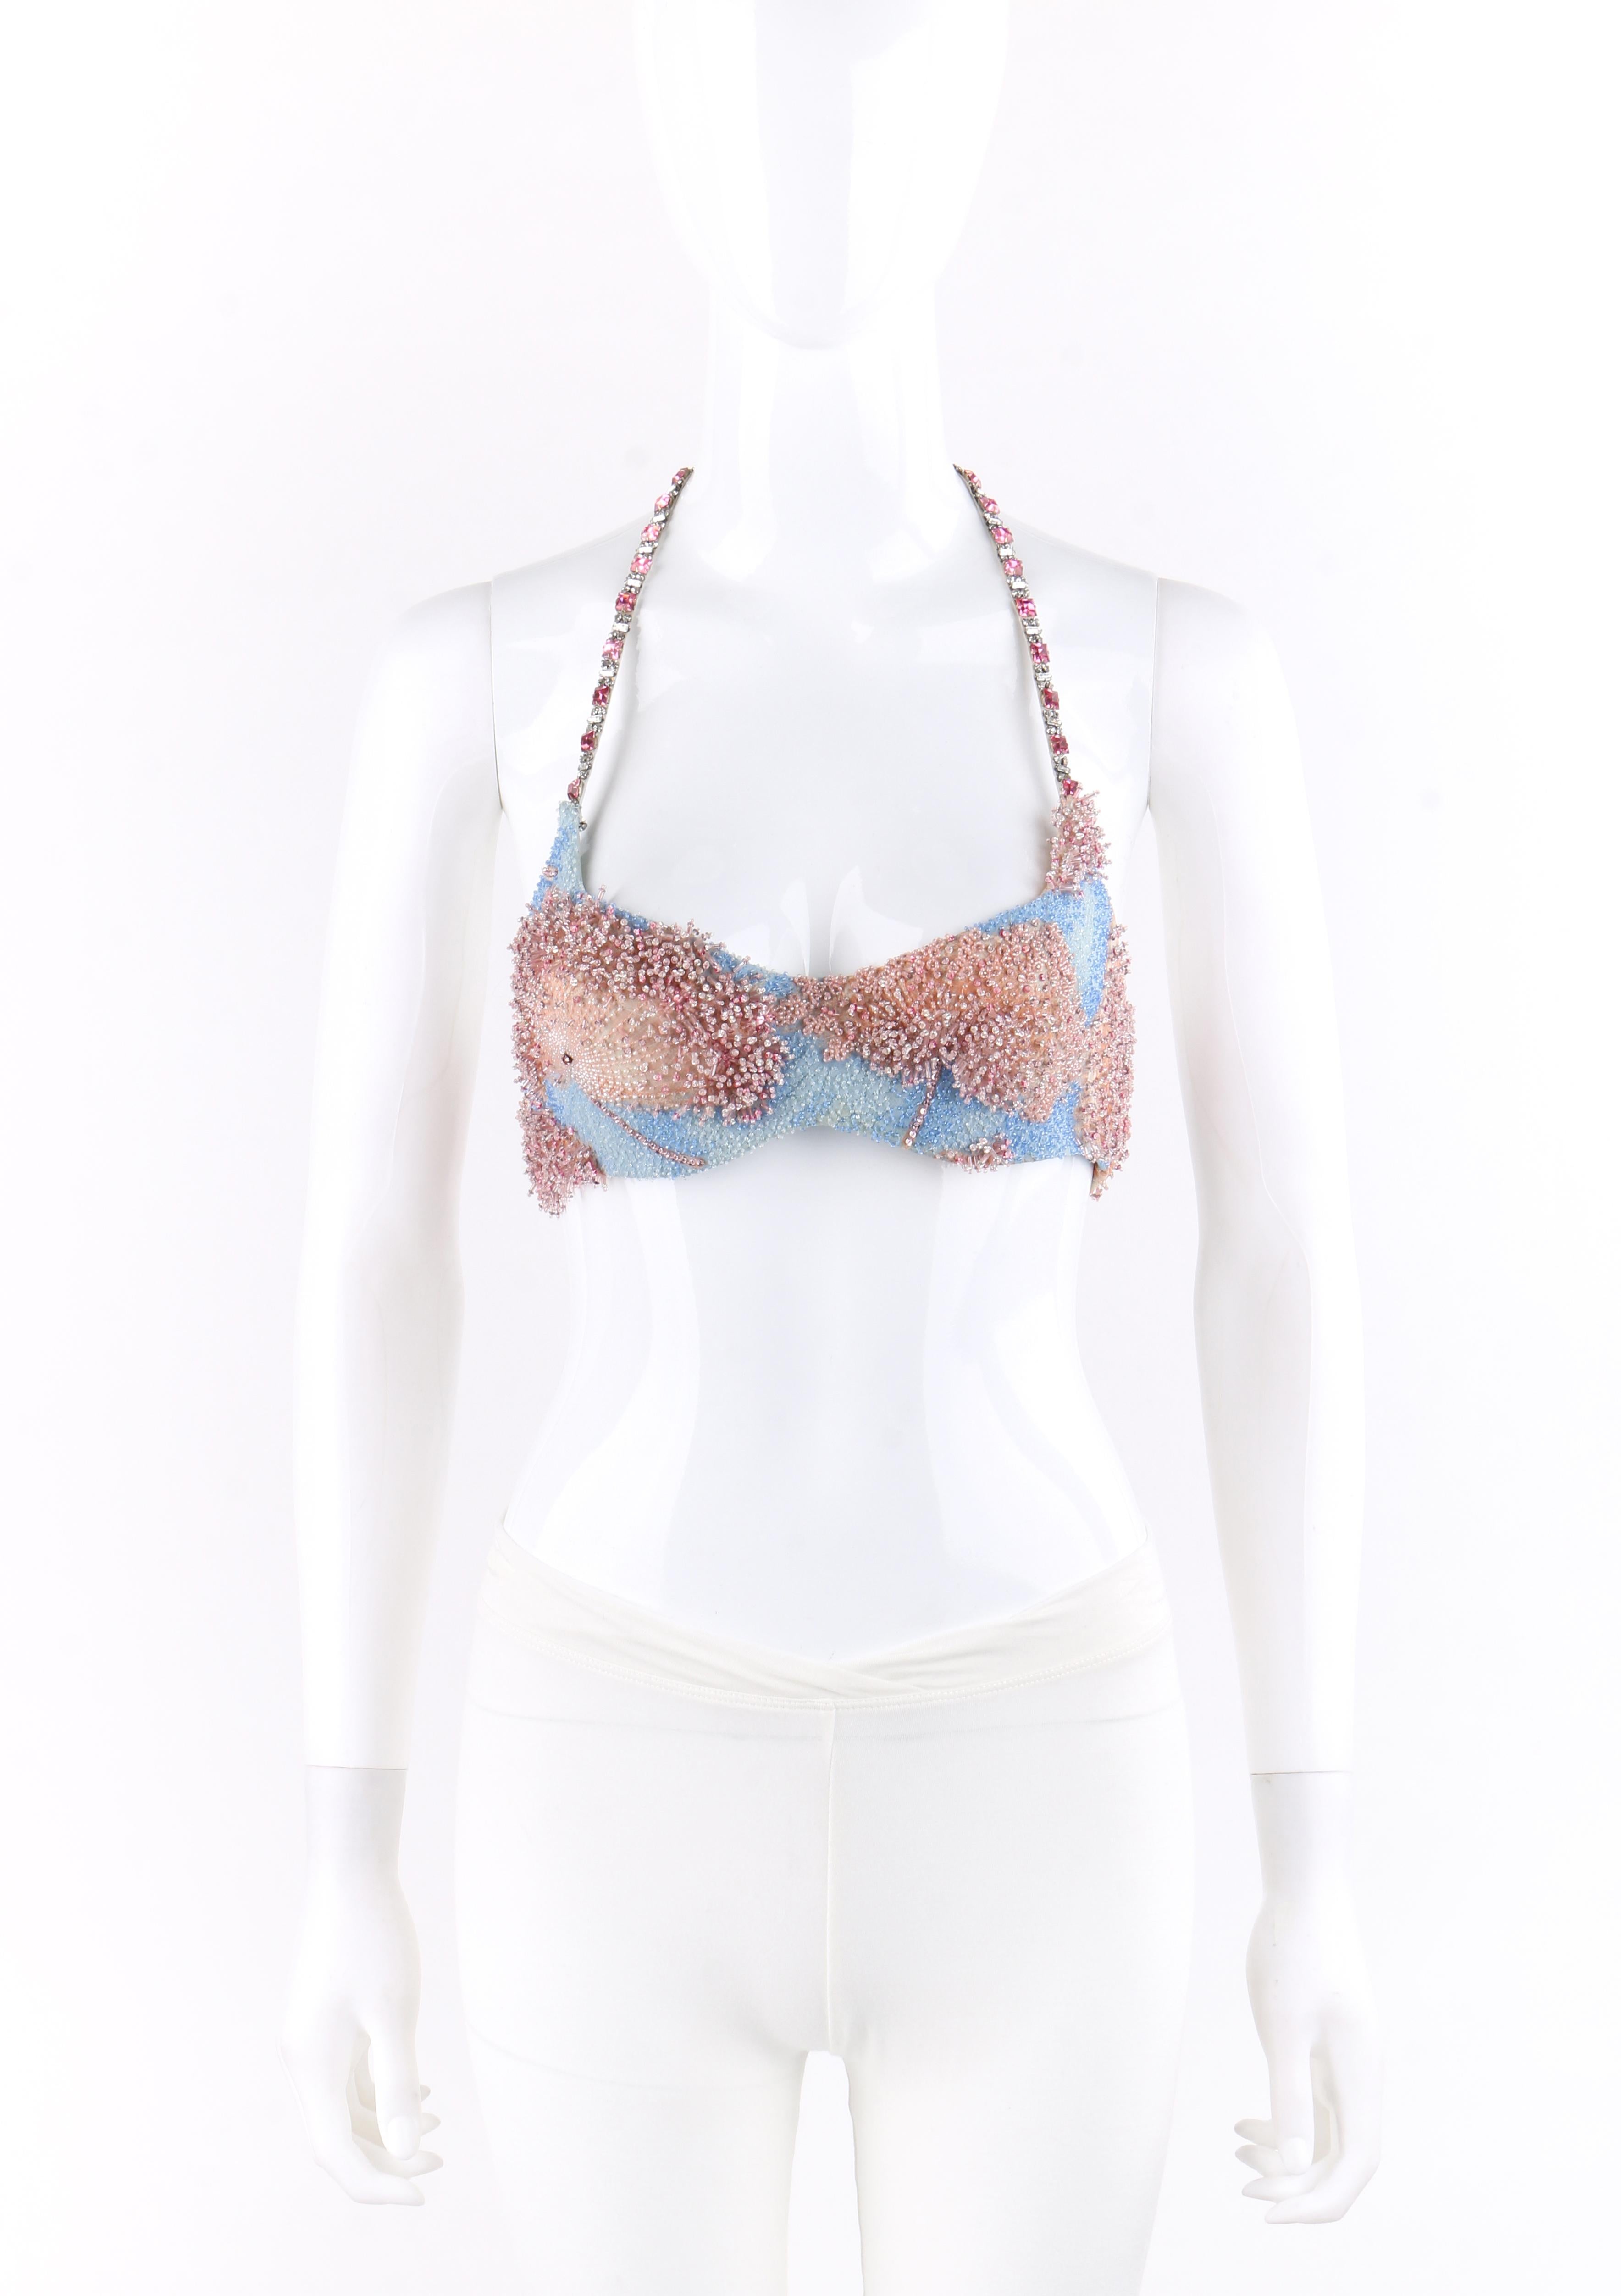 VERSACE ATELIER S/S 1992 Pink & Blue Silk Crystal Beaded Floral Halter Bra Top
  
Brand / Manufacturer: Versace Atelier
Collection: S/S 1992
Designer: Gianni Versace
Style: Bra top
Color(s): Shades of peach pink, blue
Lined: Yes
Marked Fabric